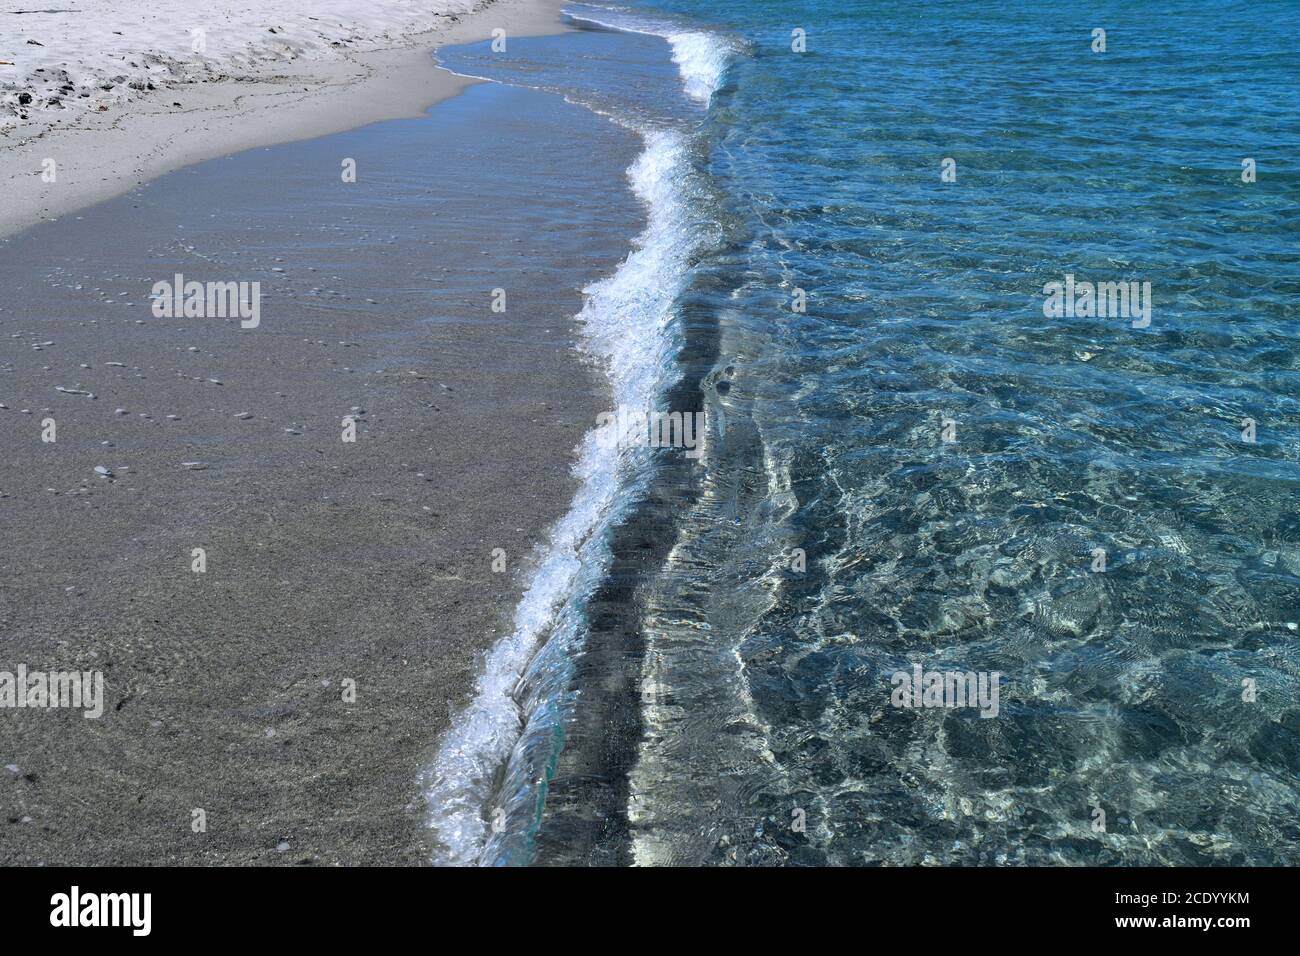 A closeup of the clear waters and white sand in Costa Smeralda, Sardinia, Italy Stock Photo